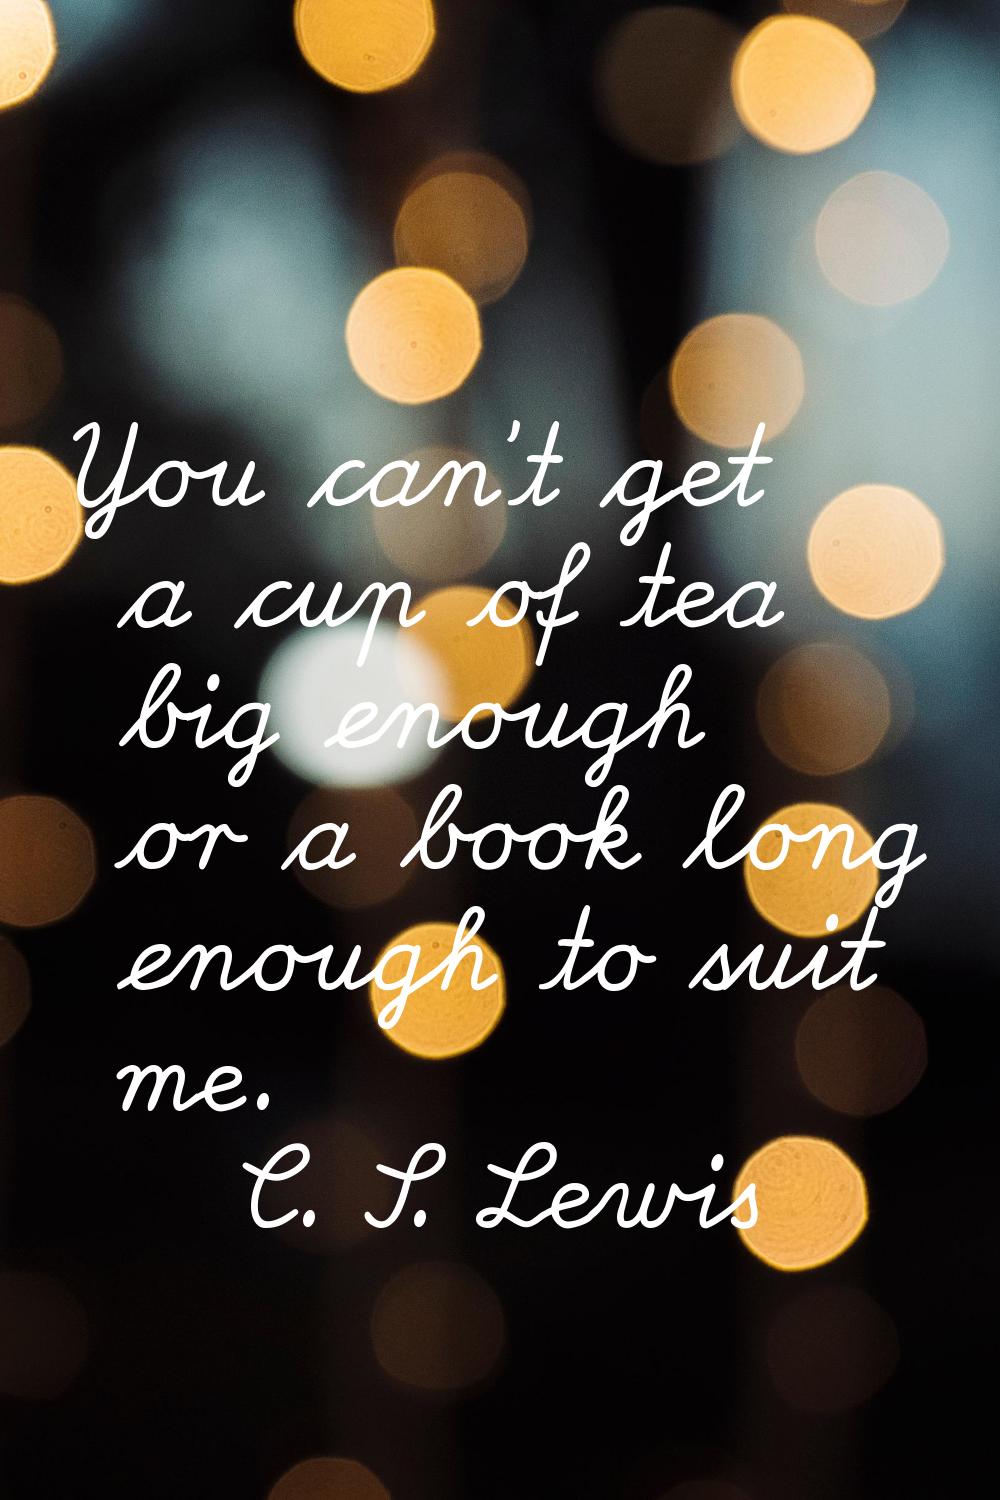 You can't get a cup of tea big enough or a book long enough to suit me.